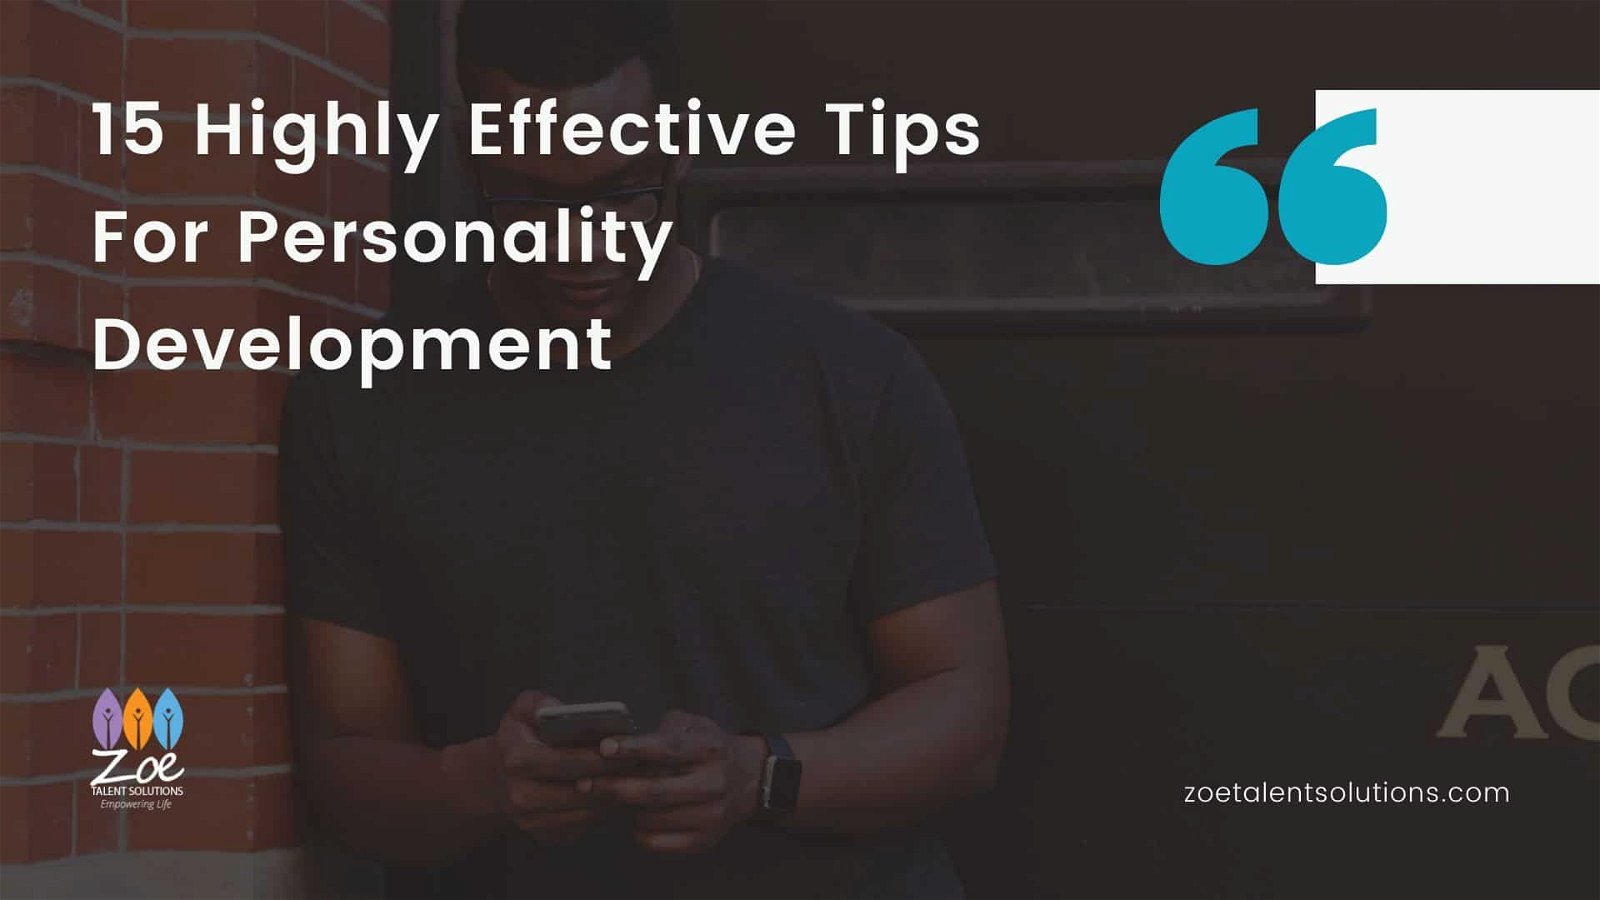 15 Highly Effective Tips For Personality Development